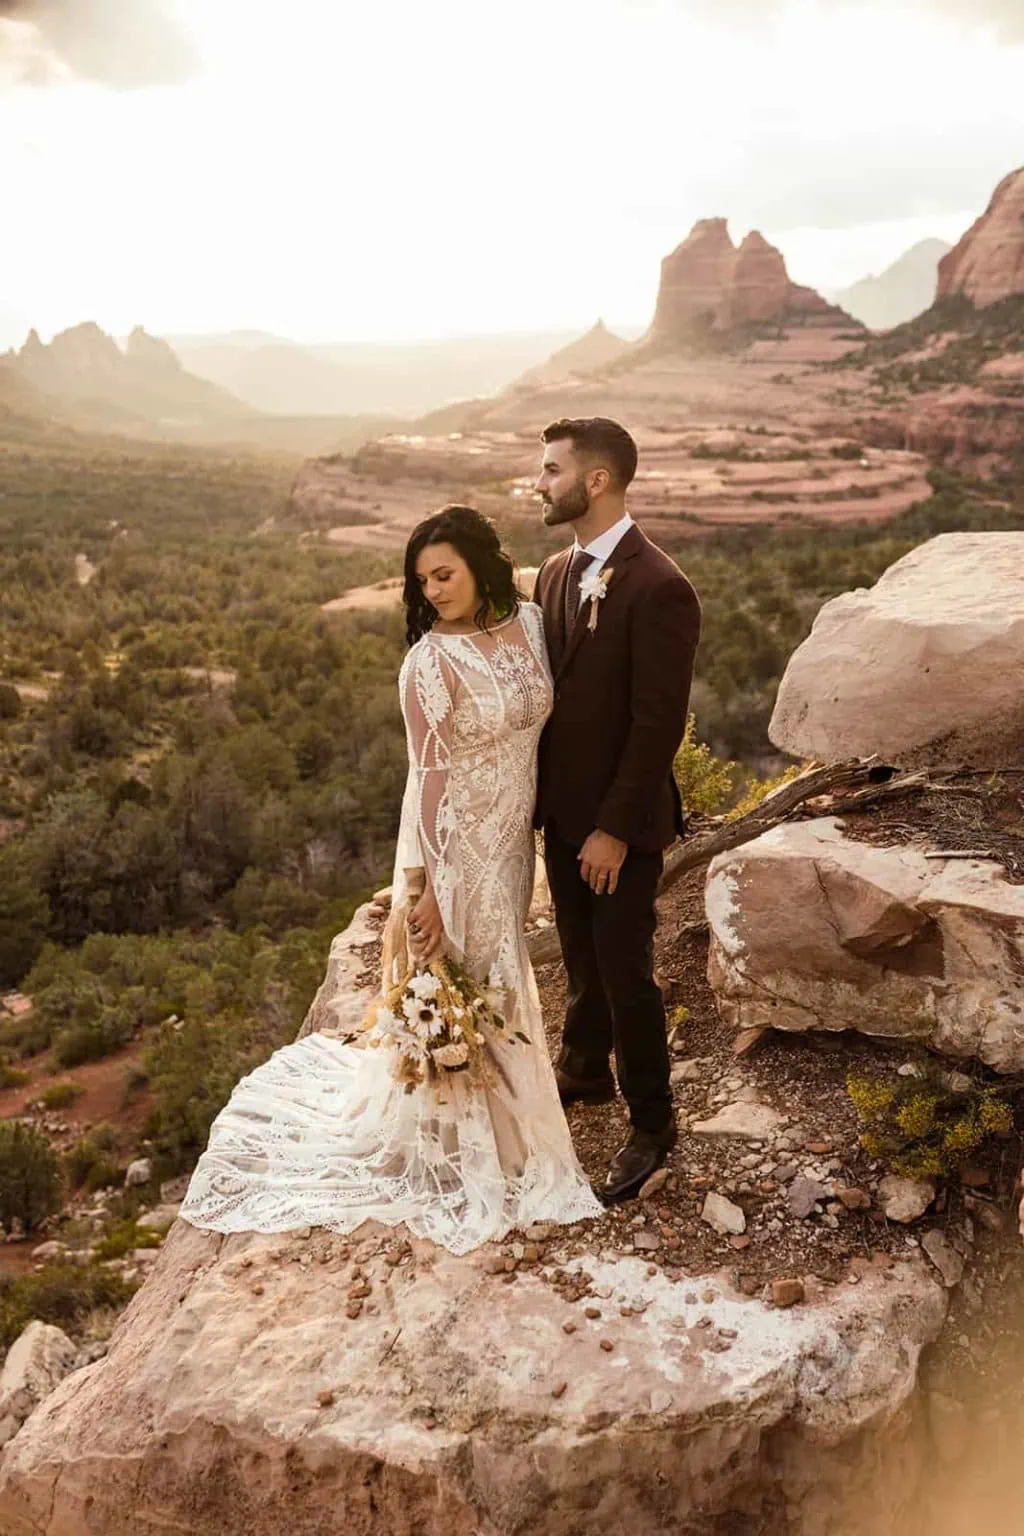 The bride and groom stand together on a limestone ledge with the sunset view of sedona behind them.